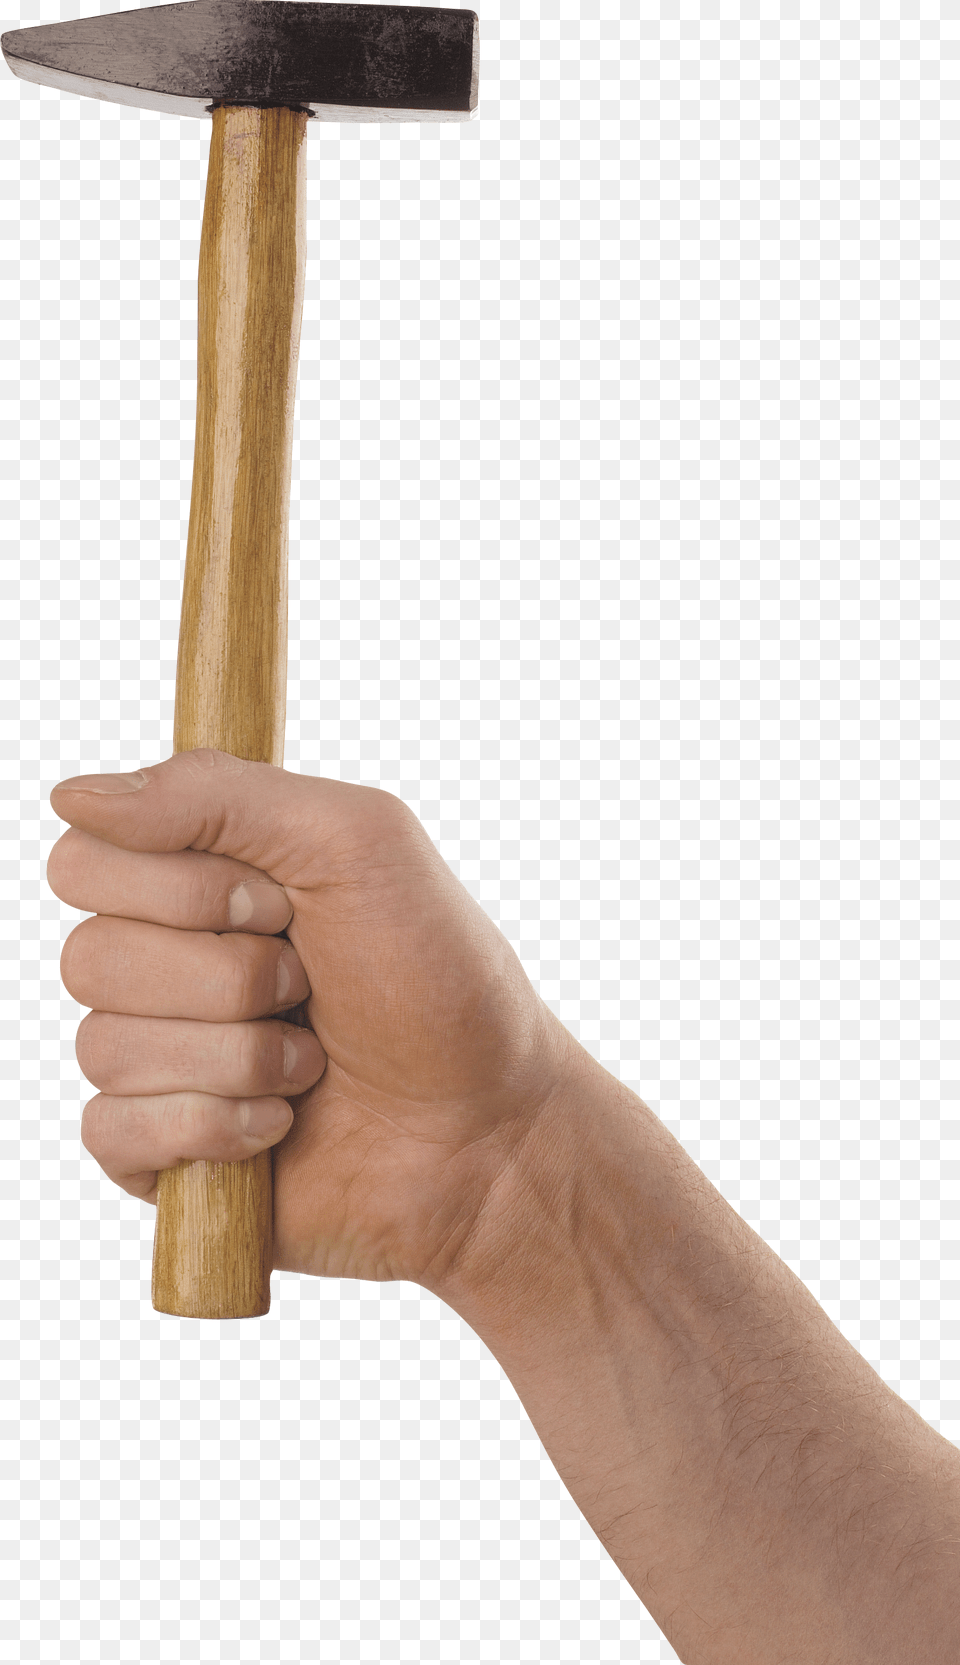 Hammer, Device, Tool Png